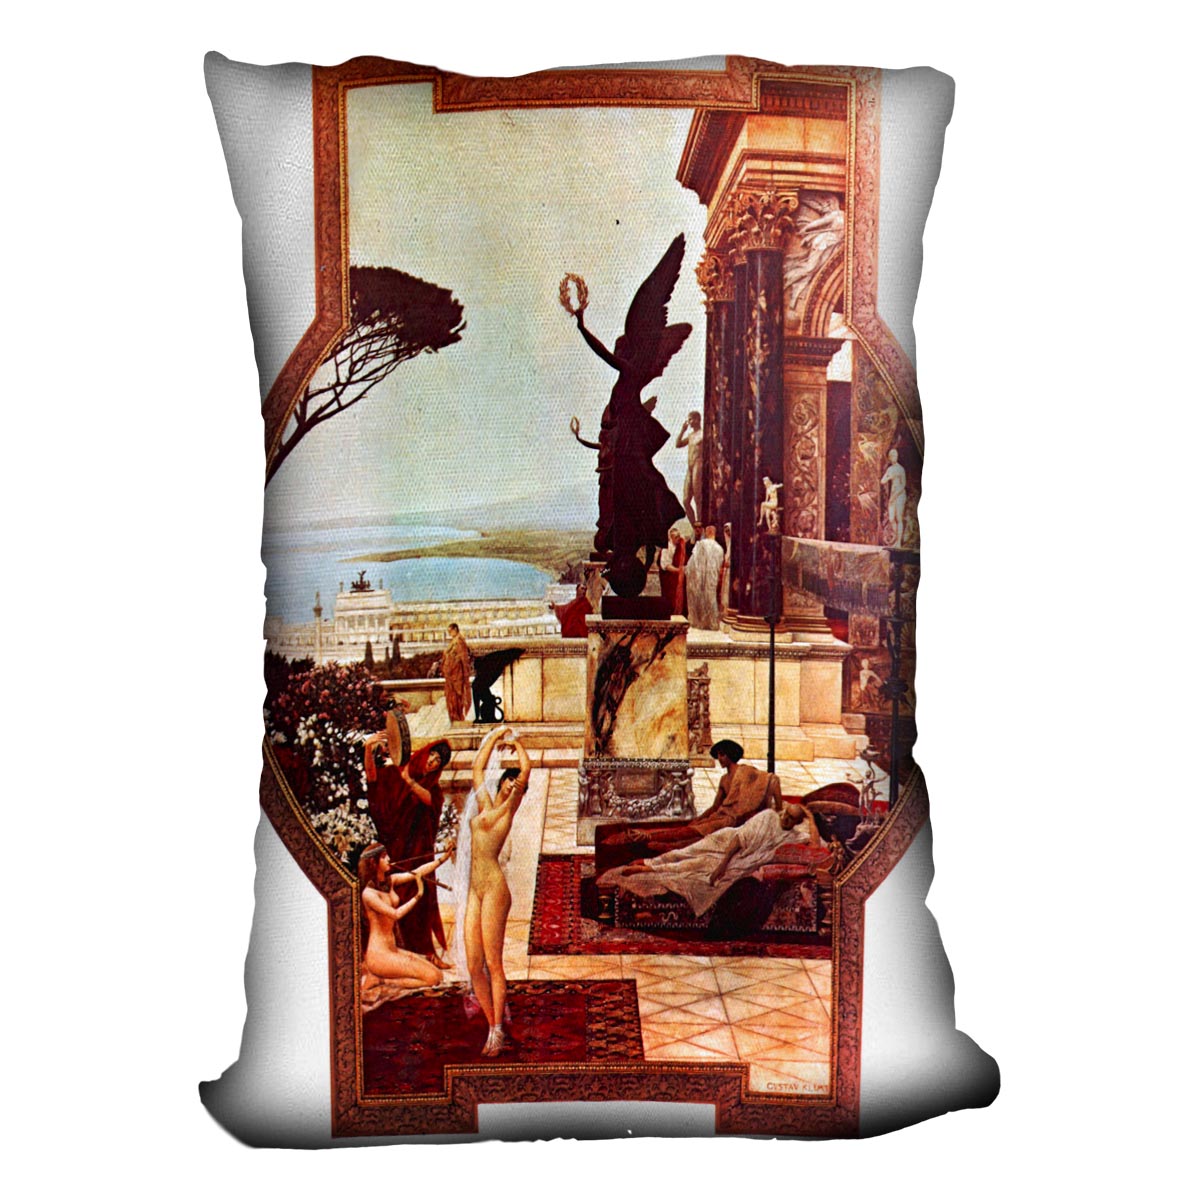 The Theatre of Taormina by Klimt Cushion